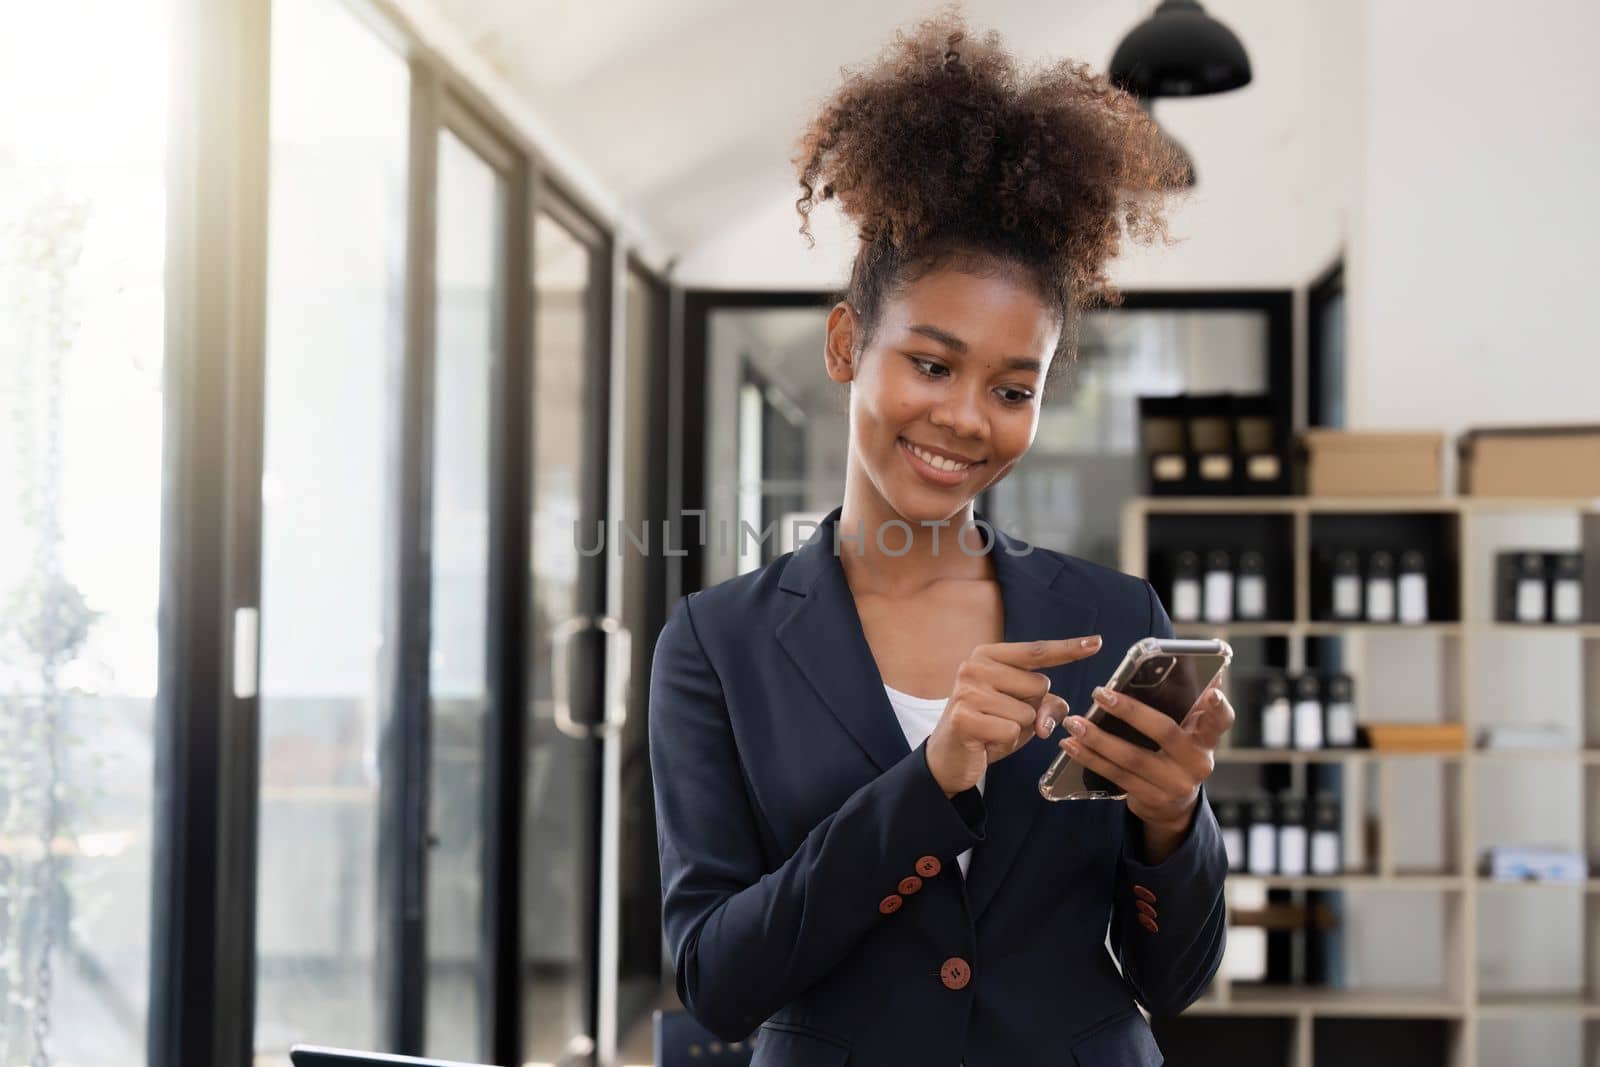 Image of young woman holding cellphone while working in office by nateemee